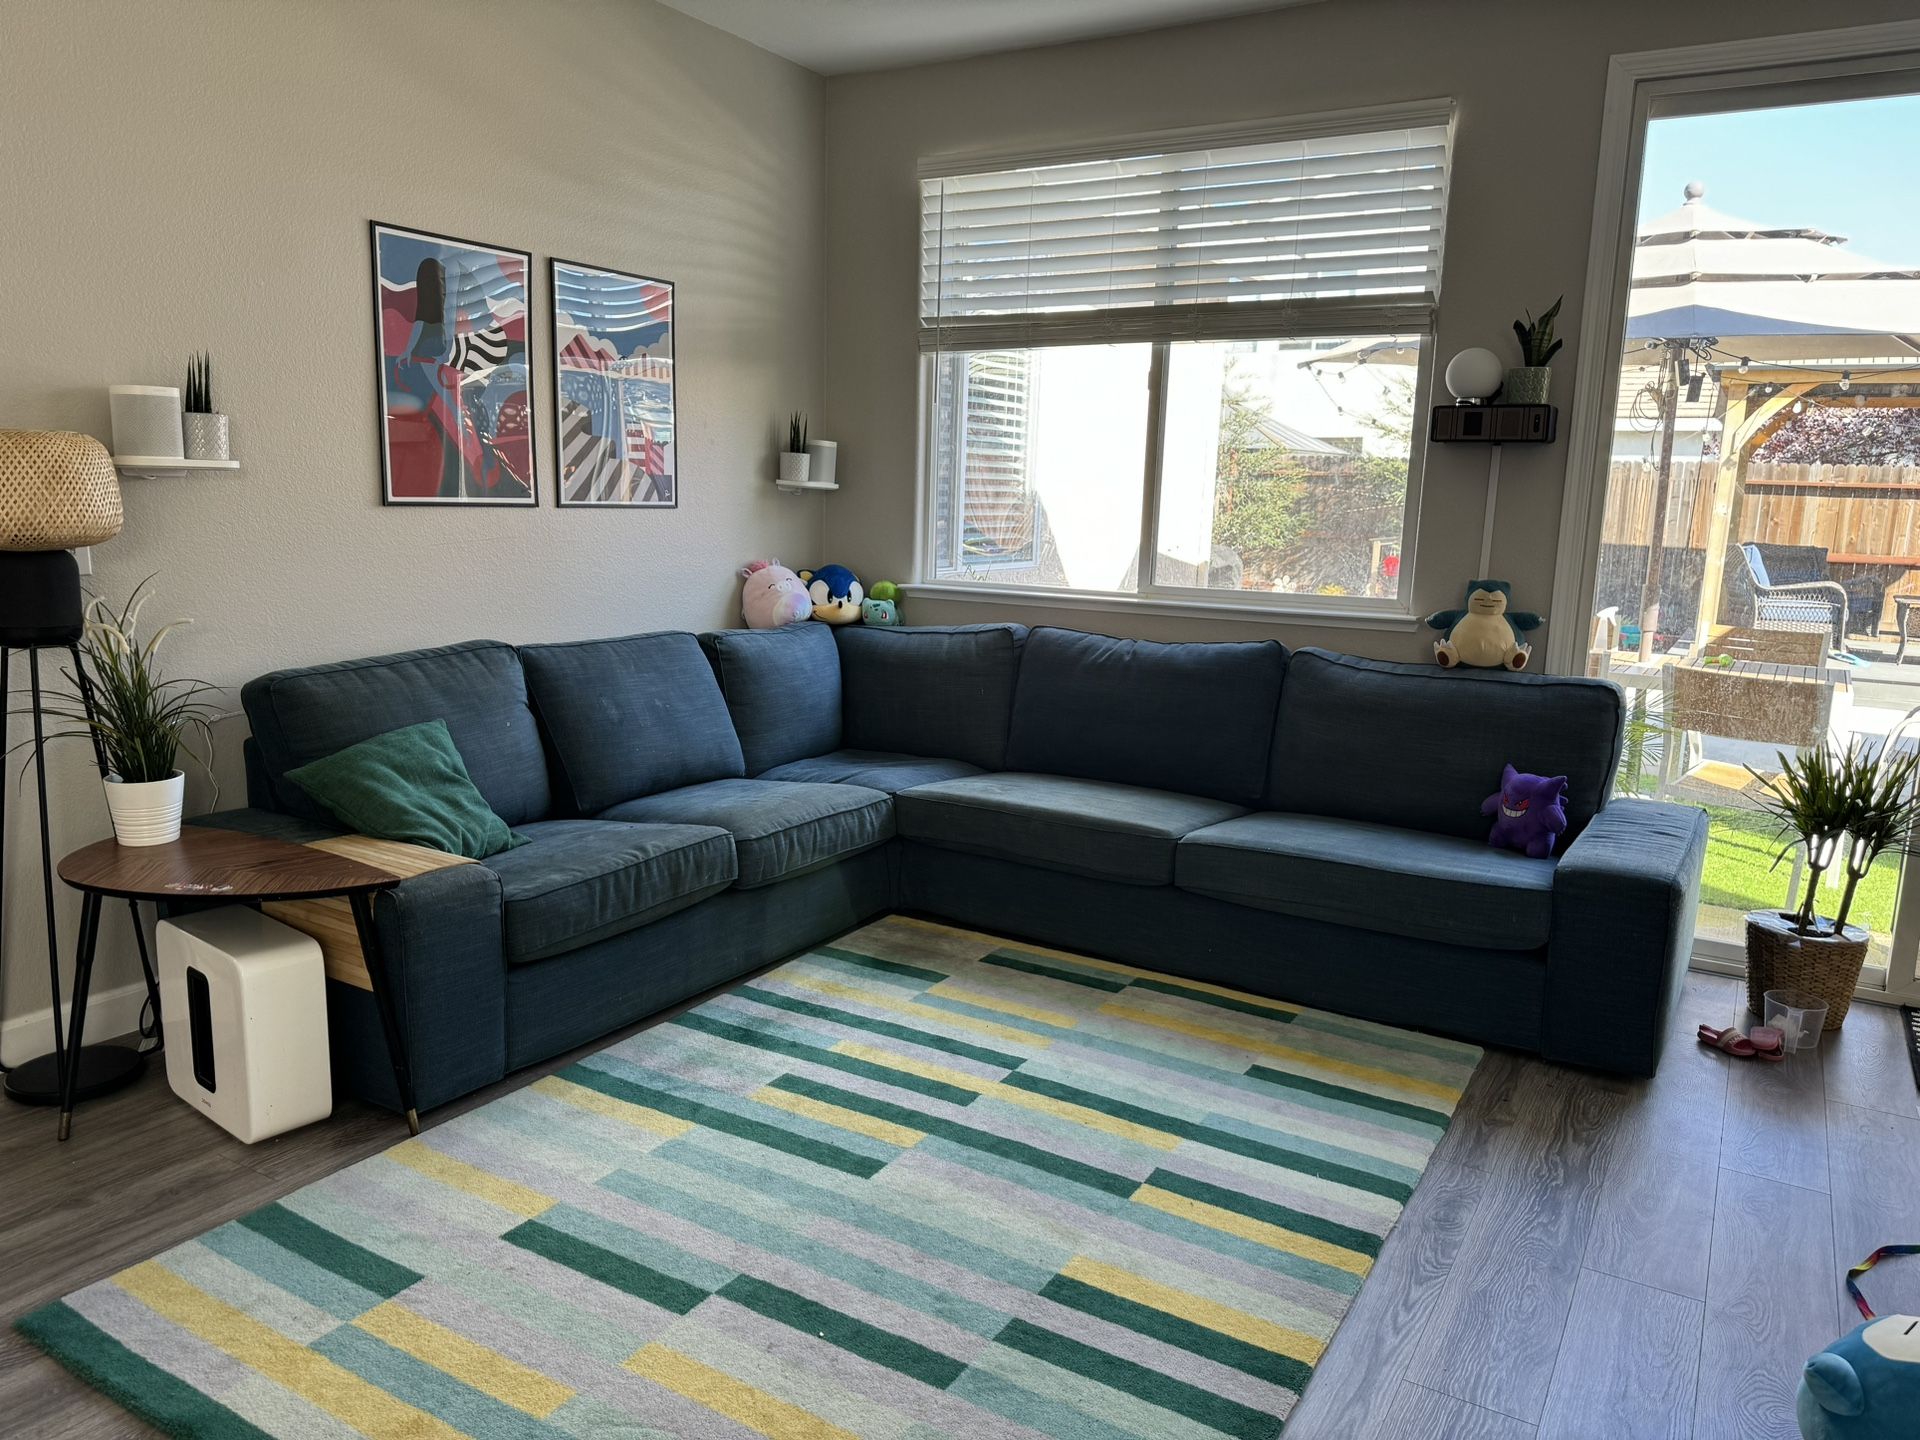 IKEA Kivik Sofa Sectional Couch With Ottoman